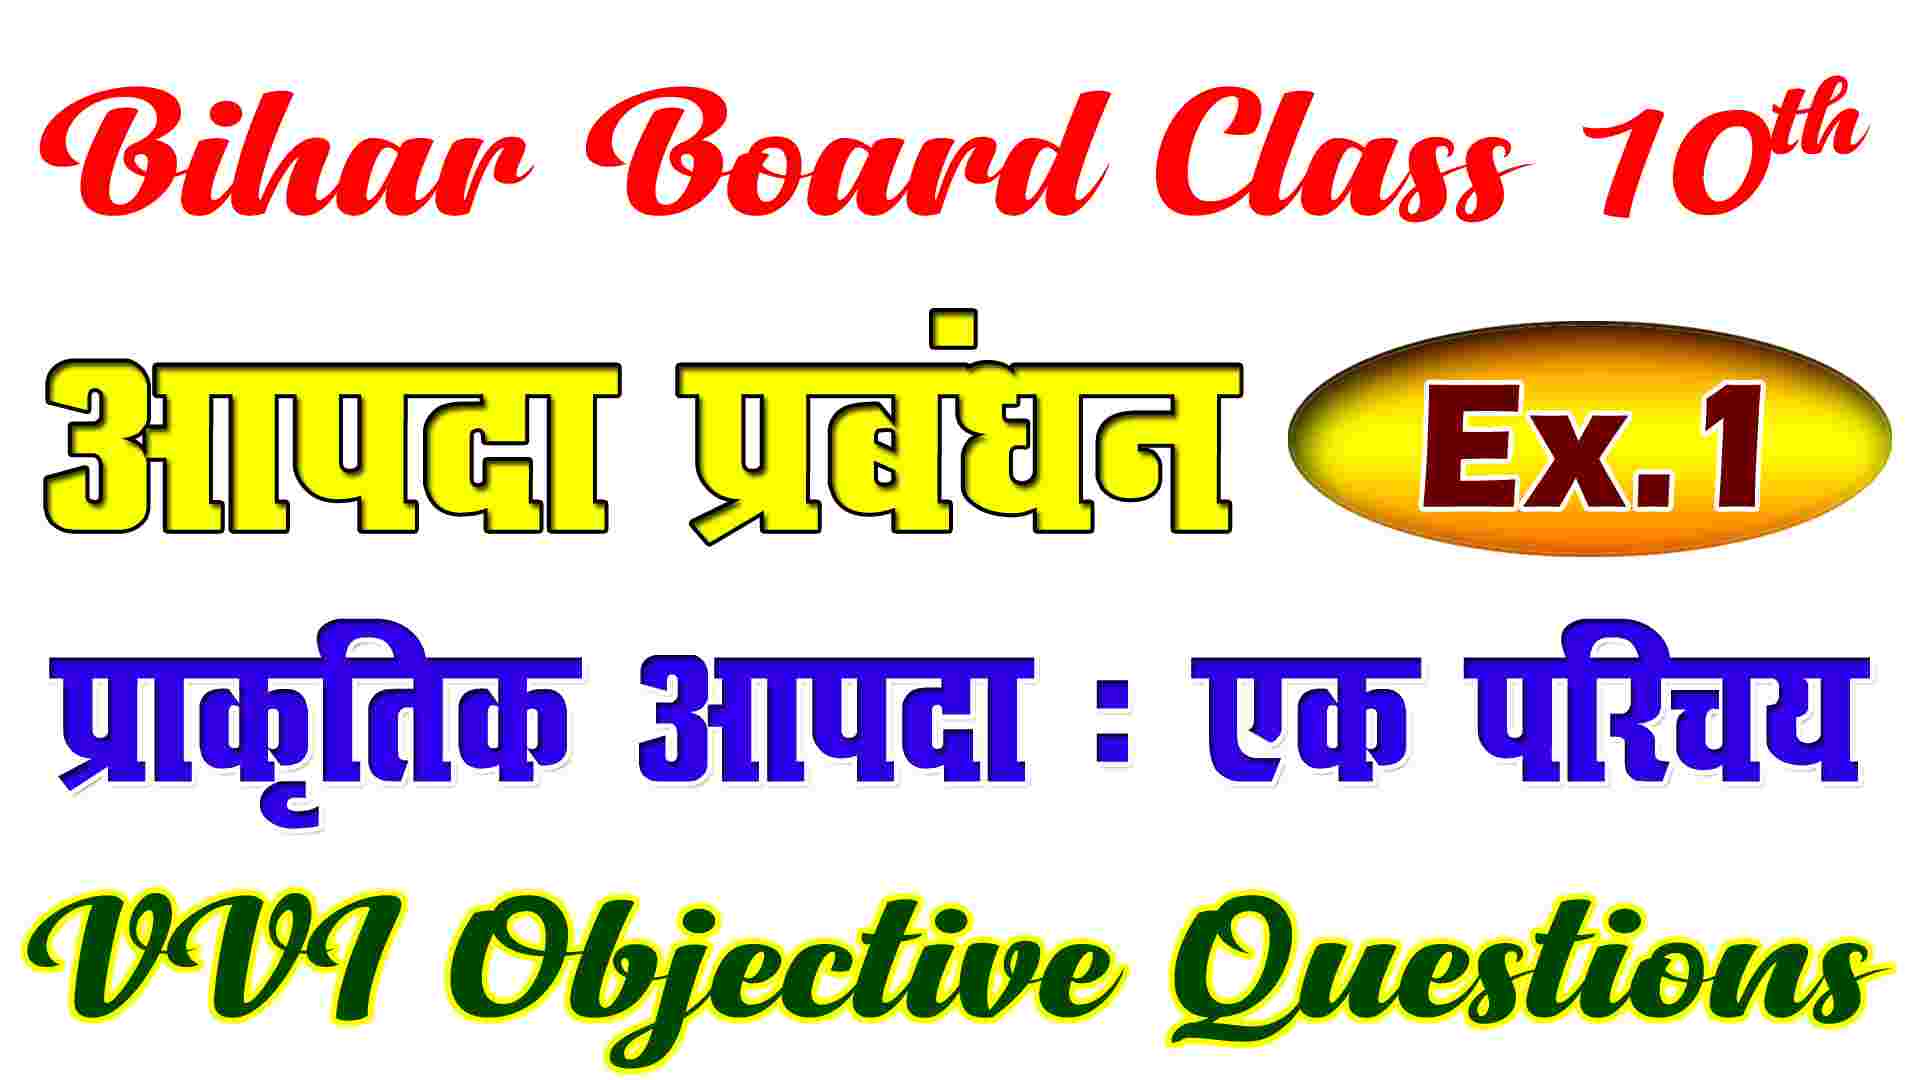 Bihhar Board Class 10th Aapada Prabandhan Chapter 1 Objective Question, Class 10th disaster management in hindi, आपदा प्रबंधन ncert class 10